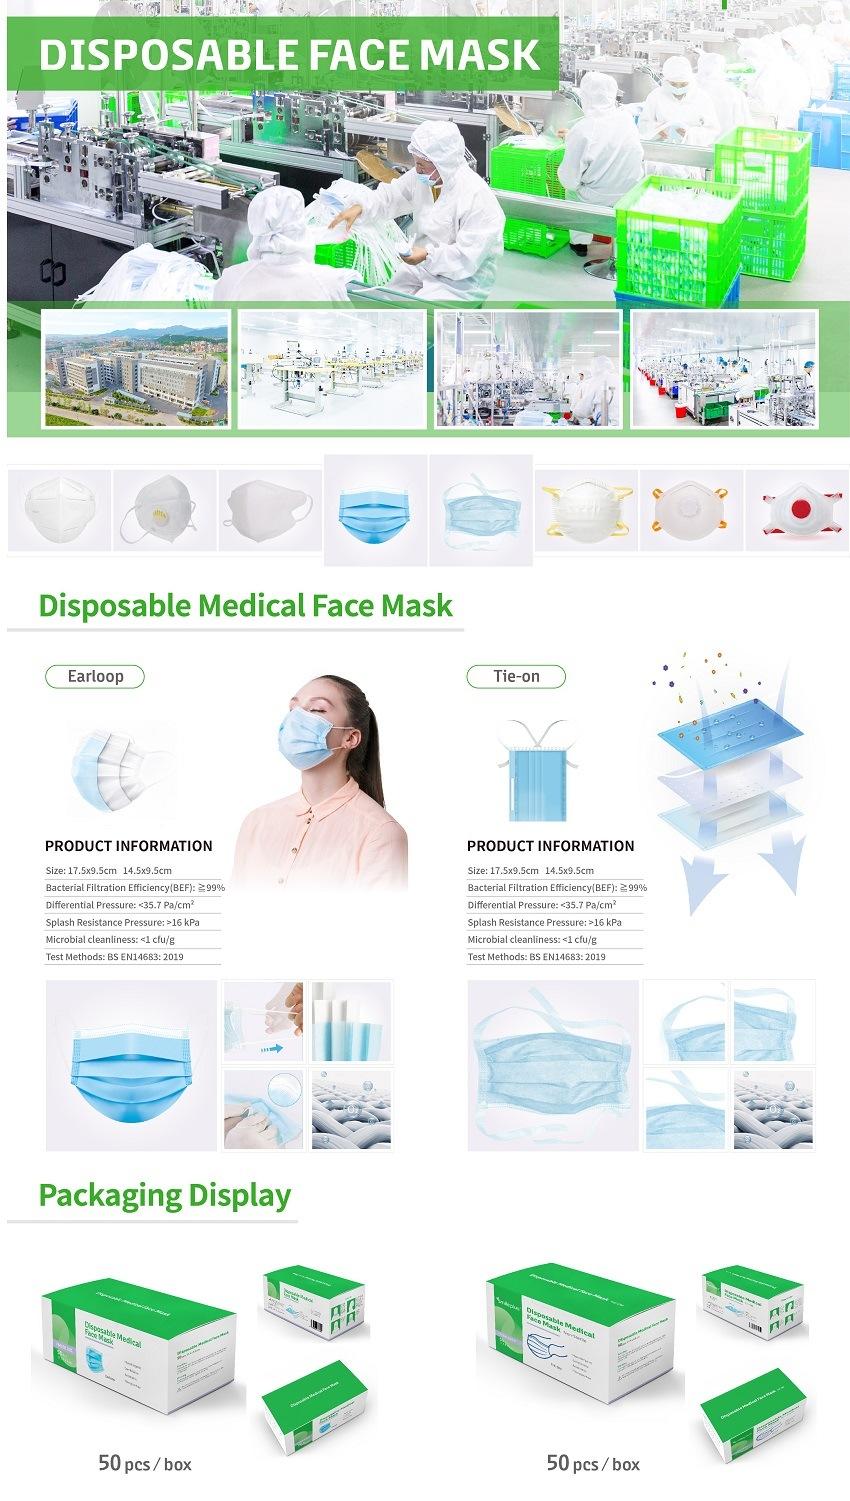 The Best KN95 Protection Face Mask, High Filtration and Ventilation Security with Valve